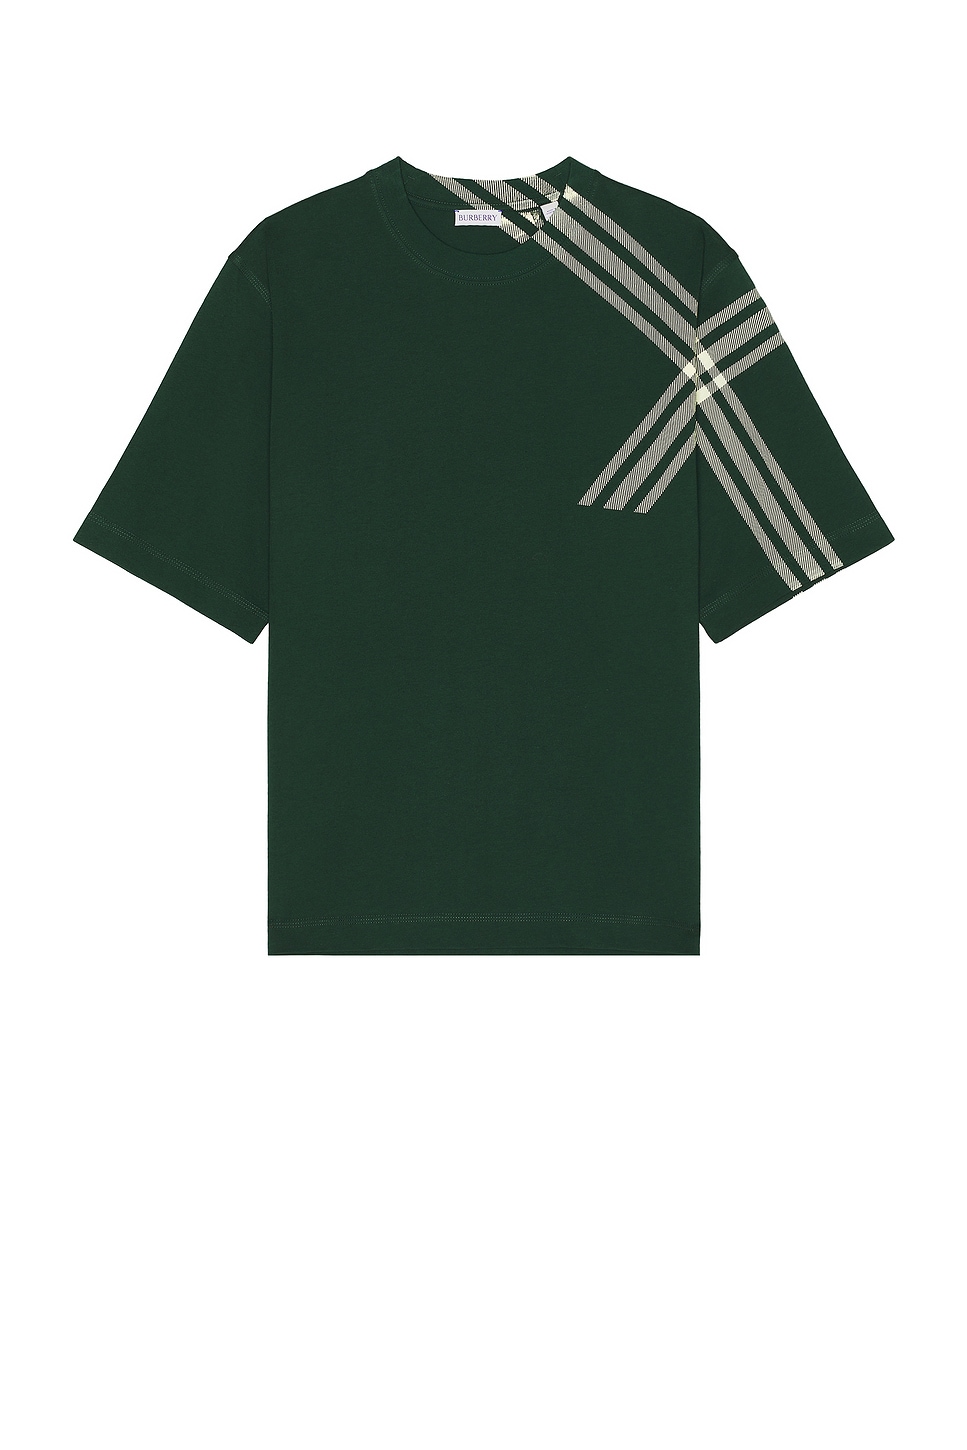 Image 1 of Burberry Check Pattern T-shirt in Ivy